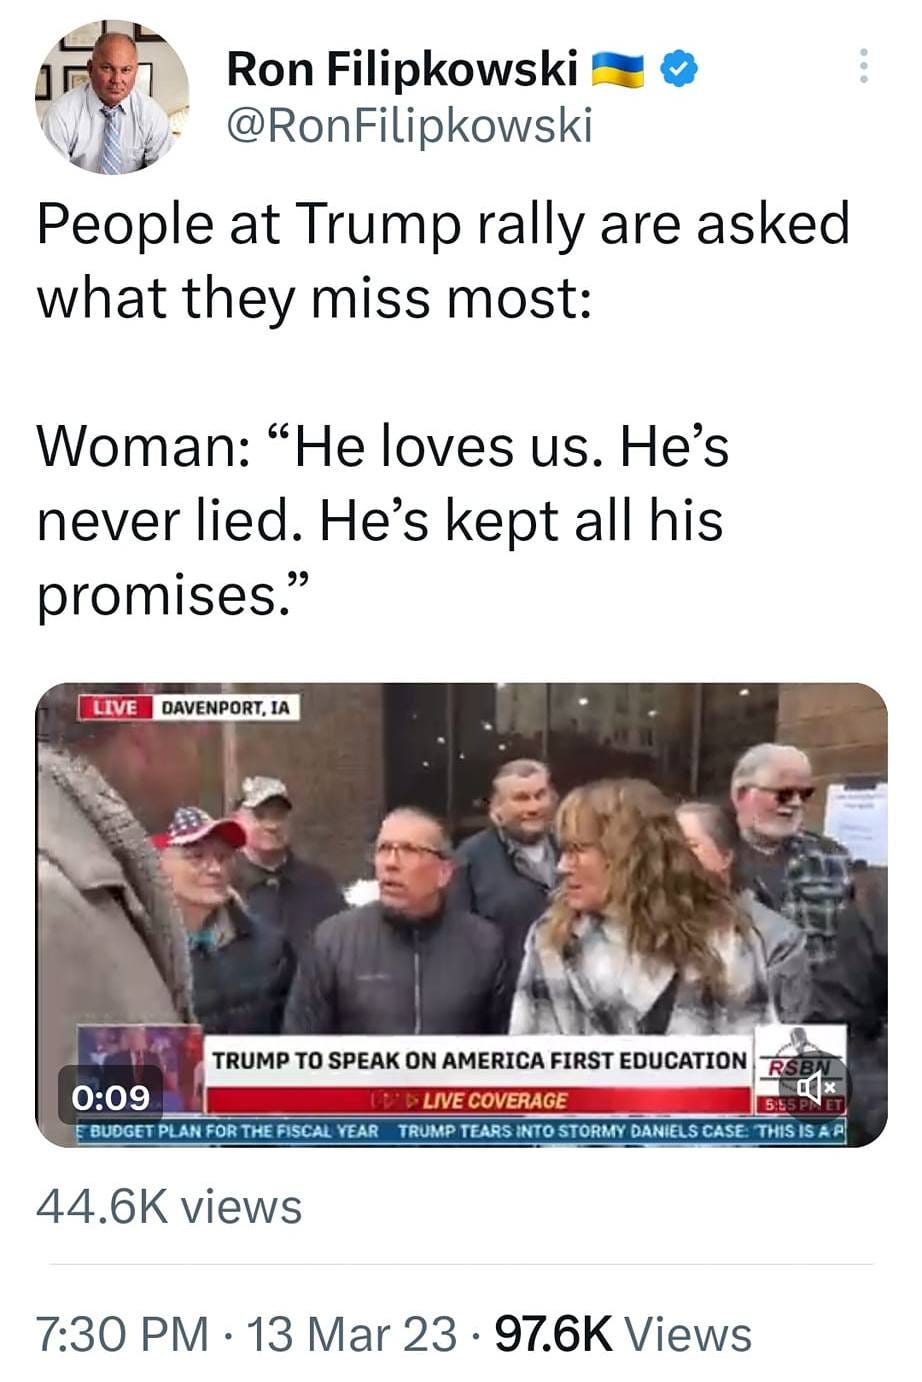 May be an image of 5 people and text that says '8:33 4G: 23% Tweet t You Retweeted Ron Filipkowski @RonFilipkowski People at Trump rally are asked what they miss most: Woman: "He loves us. He's never lied. He's kept all his promises." LIVE DAVENPORT,1A IA TRUMP 0:09 PLANFOR SPEAK ON AMERICA FIRST EDUCATION COVERAGE FISCAL YEAR TRUMP 44.6K views DANIELSCASE 7:30 PM 13 Mar 23 97.6K Views Tweet your reply'